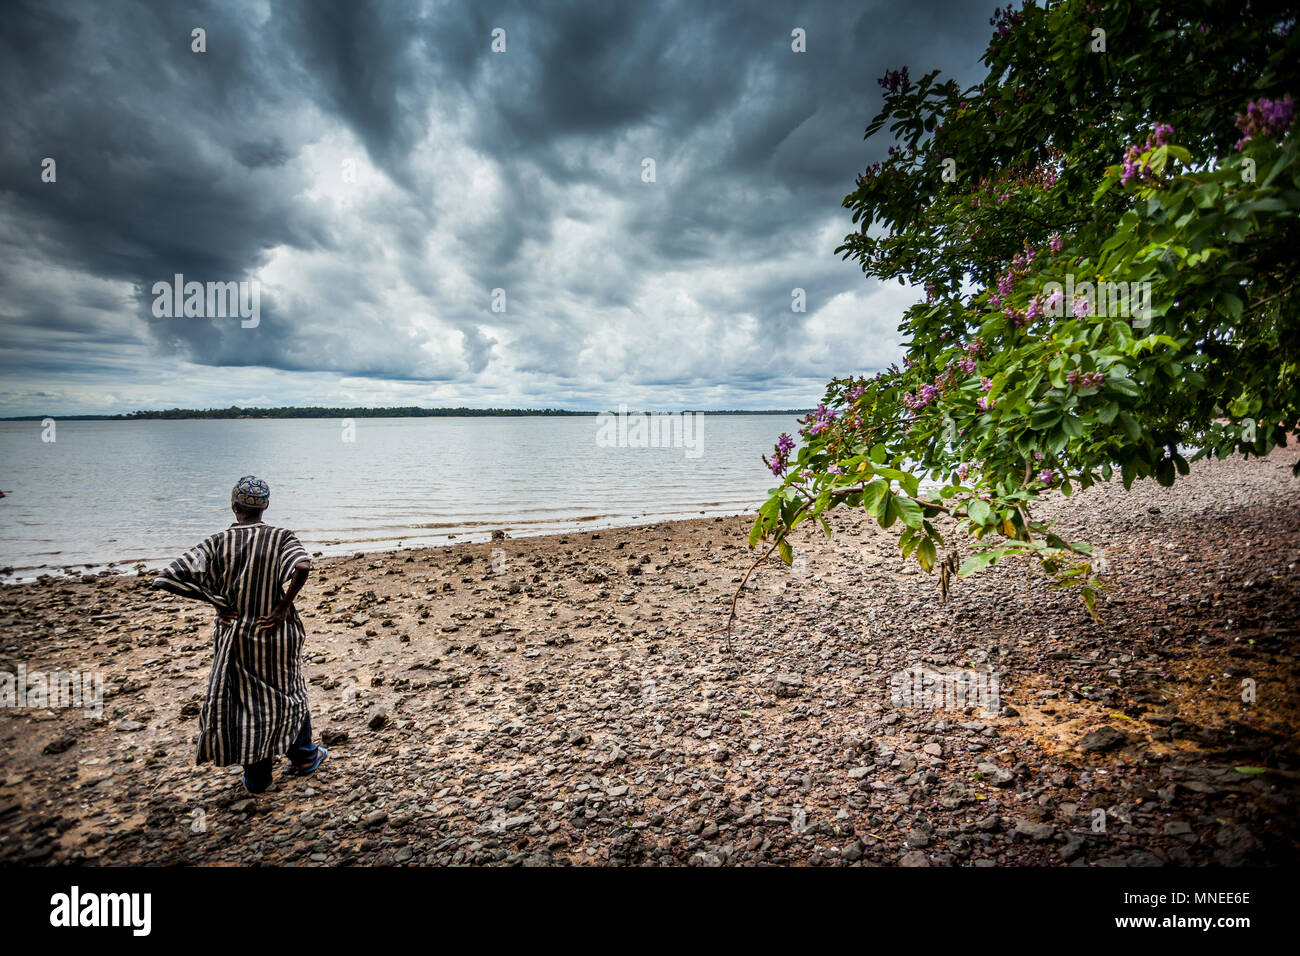 Bunce Island, Sierra Leone - June 02, 2013: West Africa, unknown person at the old slave prisons, Bunce Island was a British slave trading post in the Stock Photo